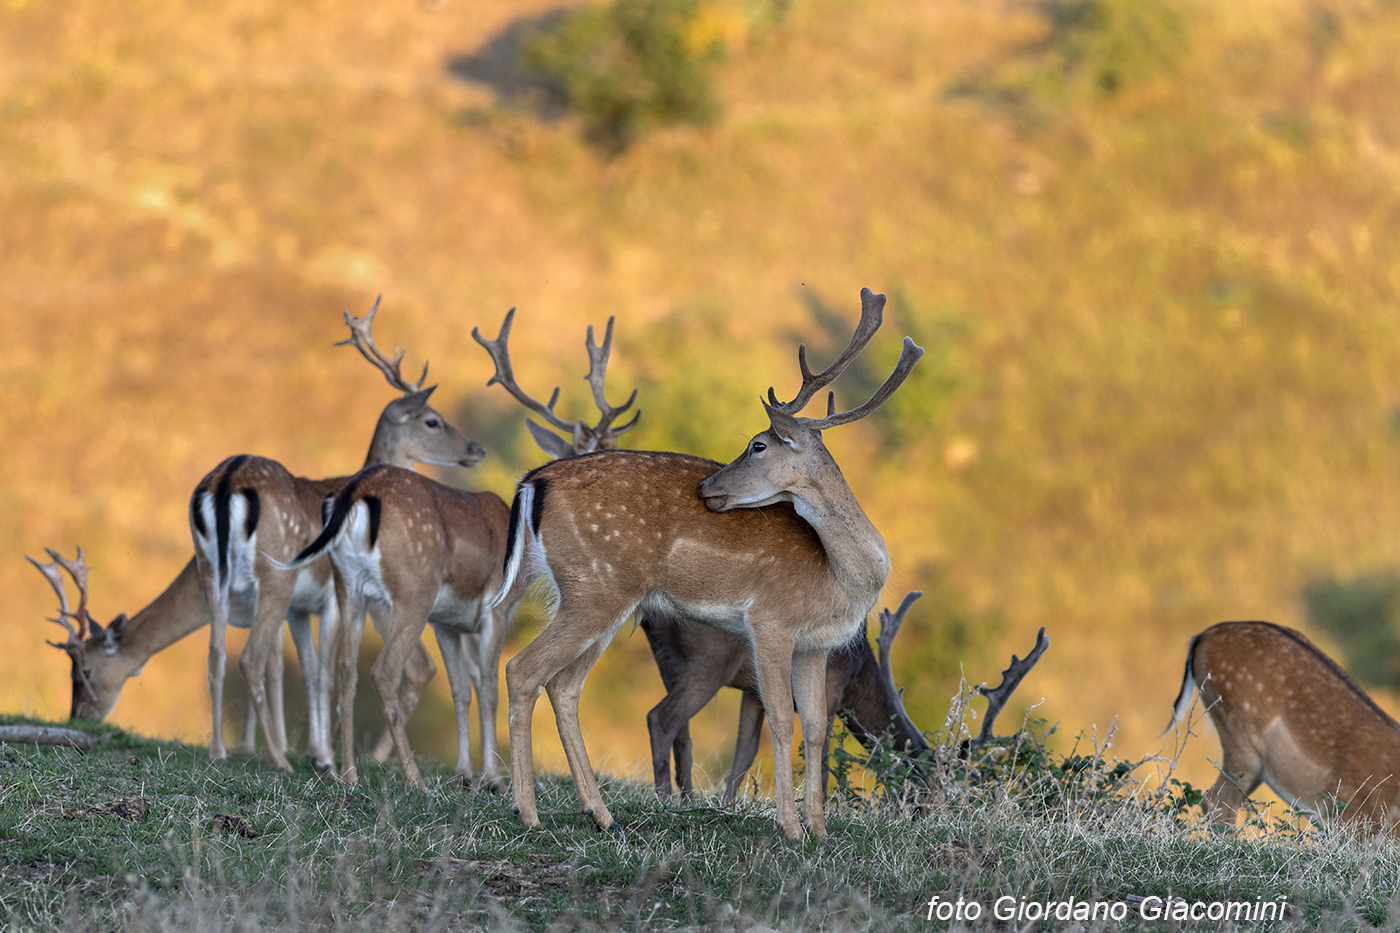 Fallow deer in the early morning a few days ago......